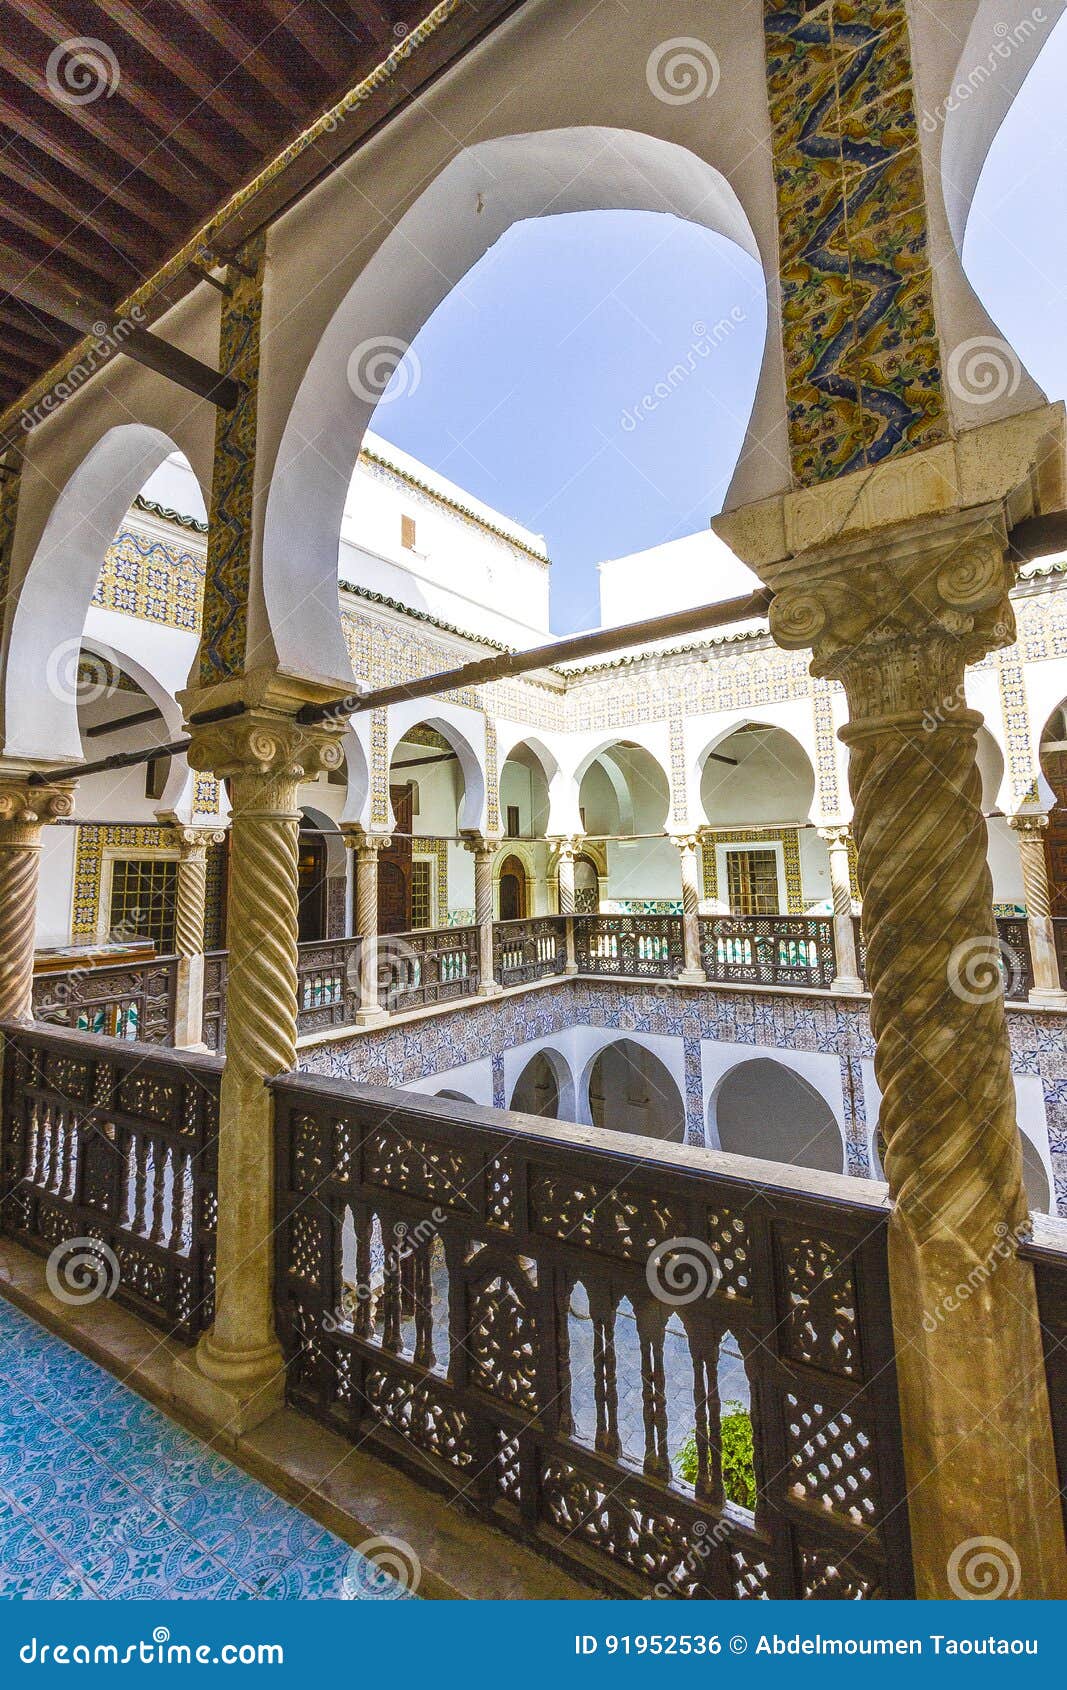 palaces of algiers